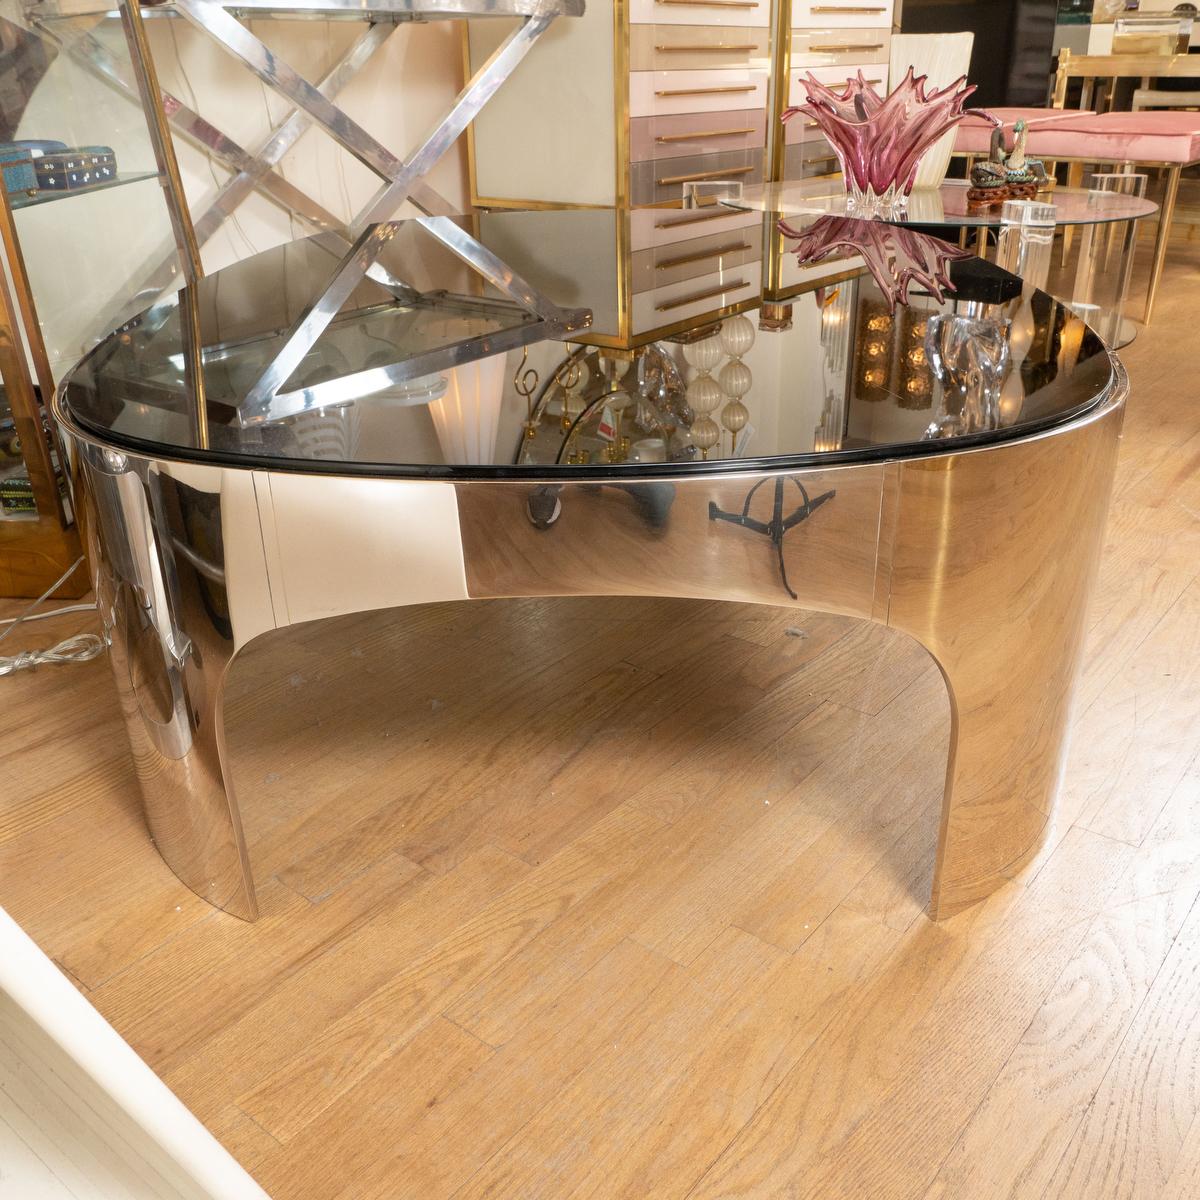 Oval polished stainless steel and black glass coffee table by Brueton. 